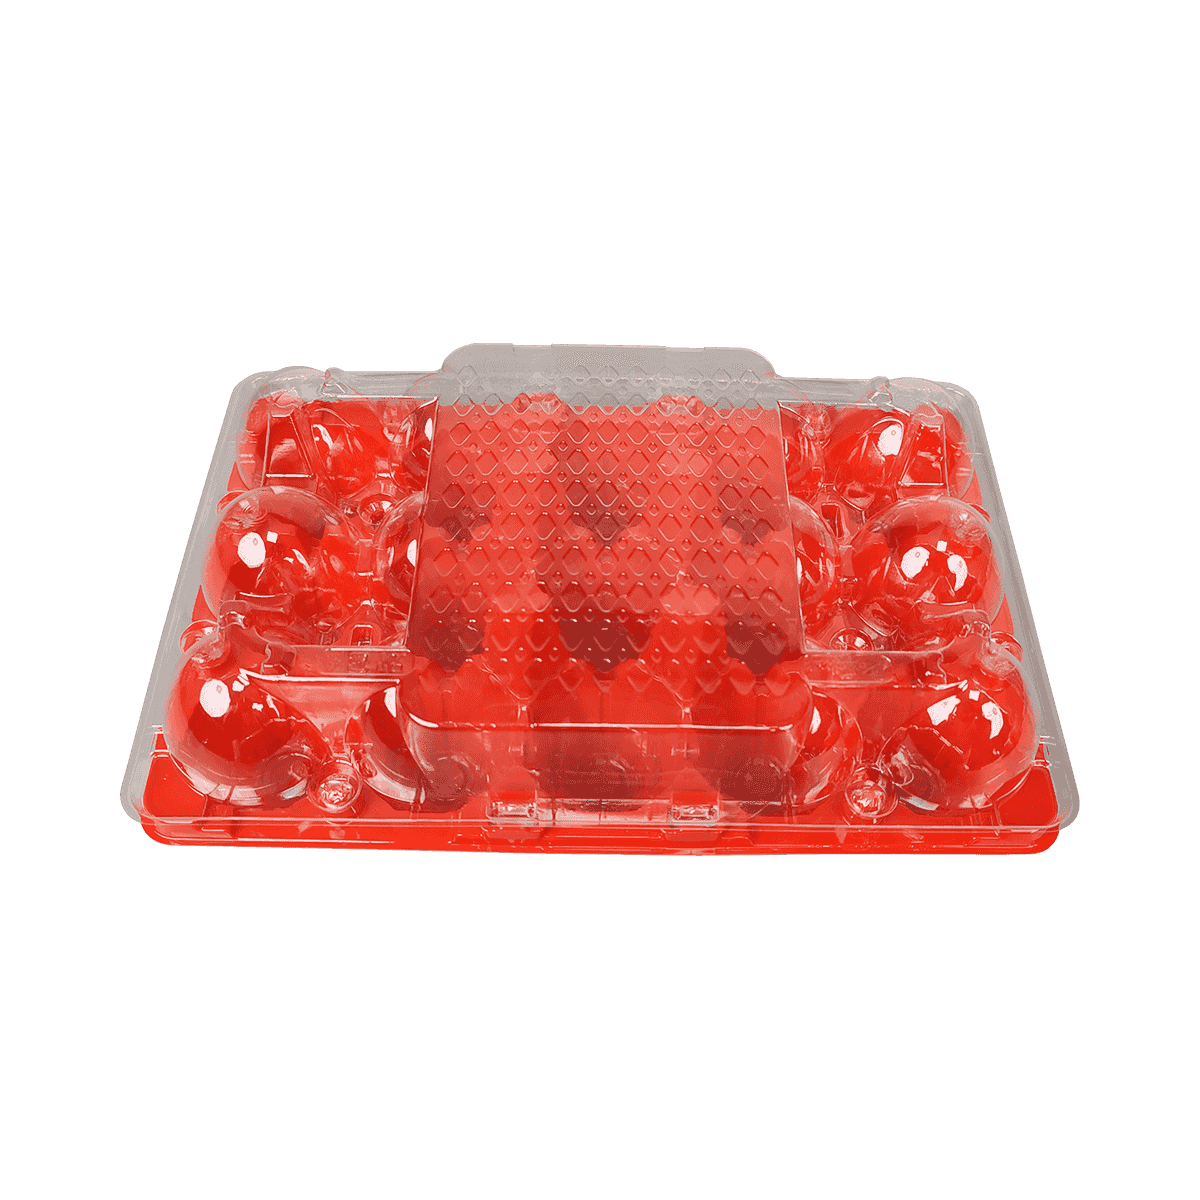 Colored bottom and transparent lid PET 15 egg cartons suitable for home storage